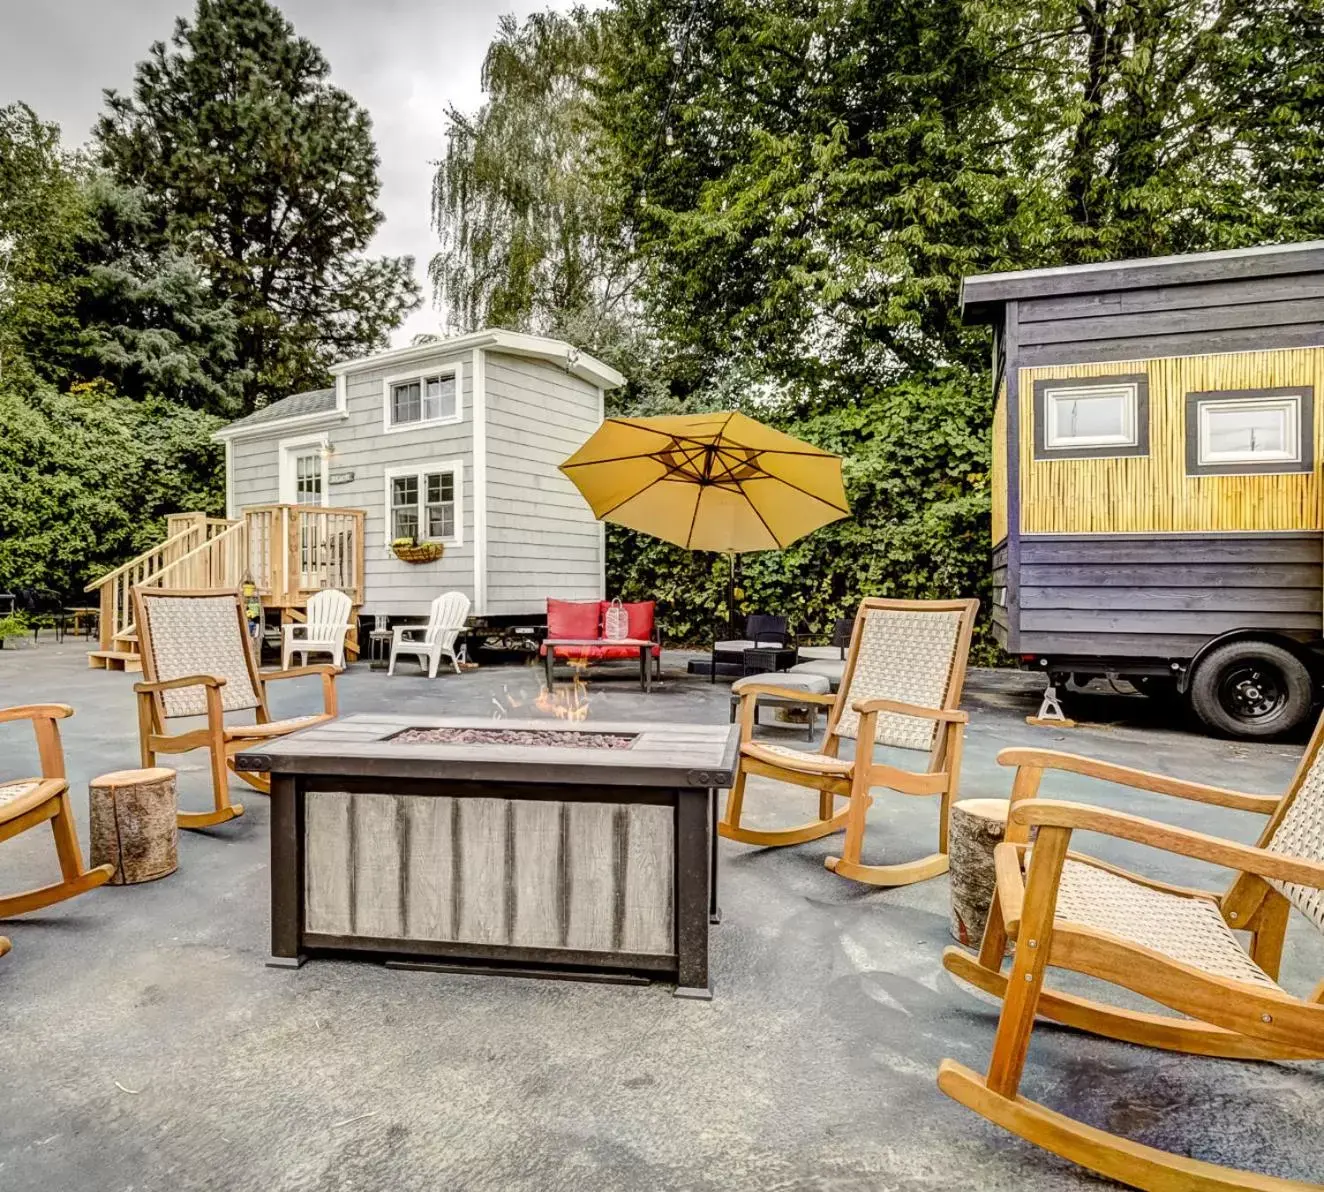 Property building, Patio/Outdoor Area in Tiny Digs - Hotel of Tiny Houses